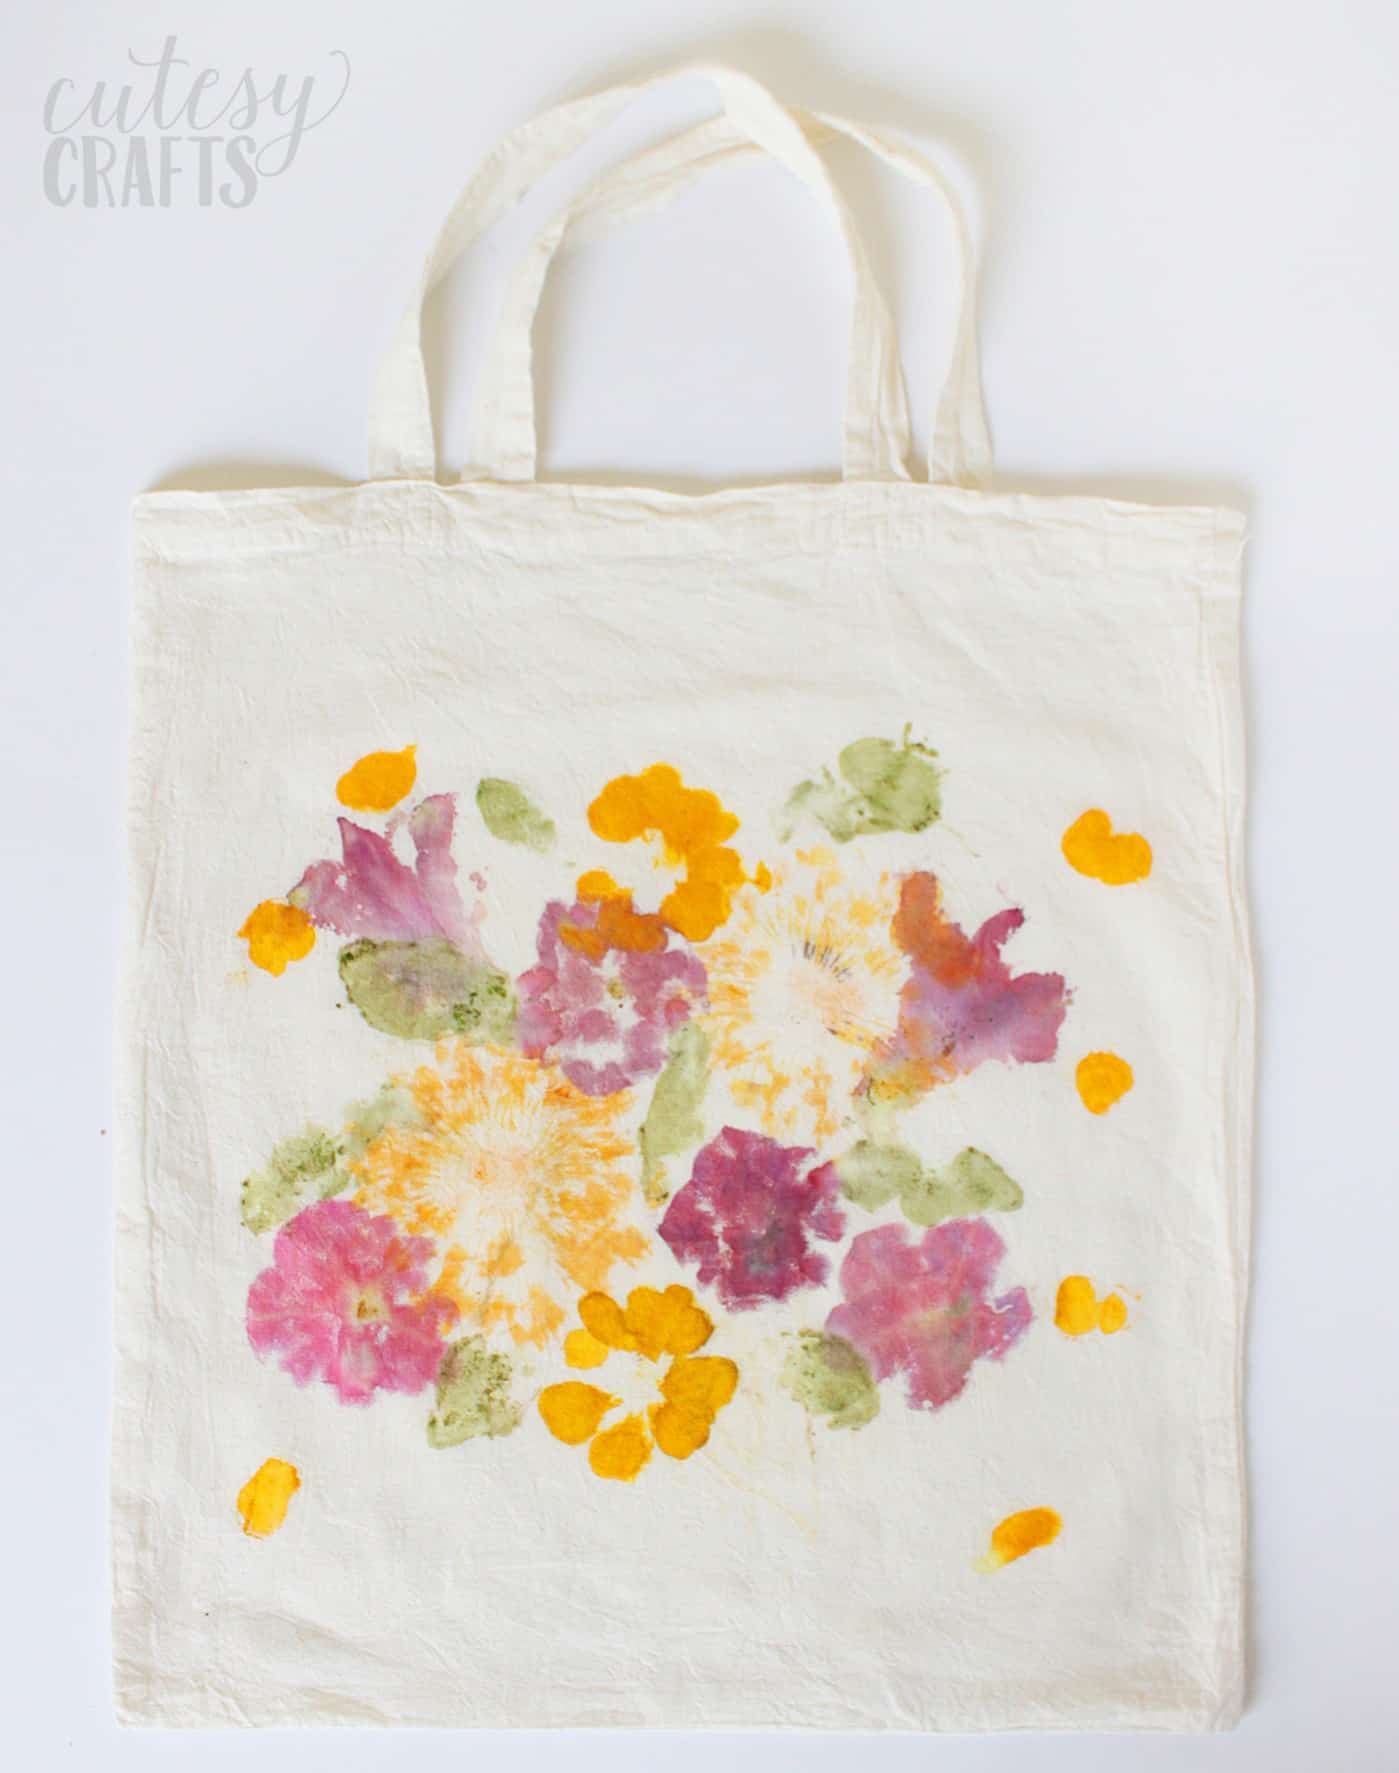 Decorate a bag with flower pounding